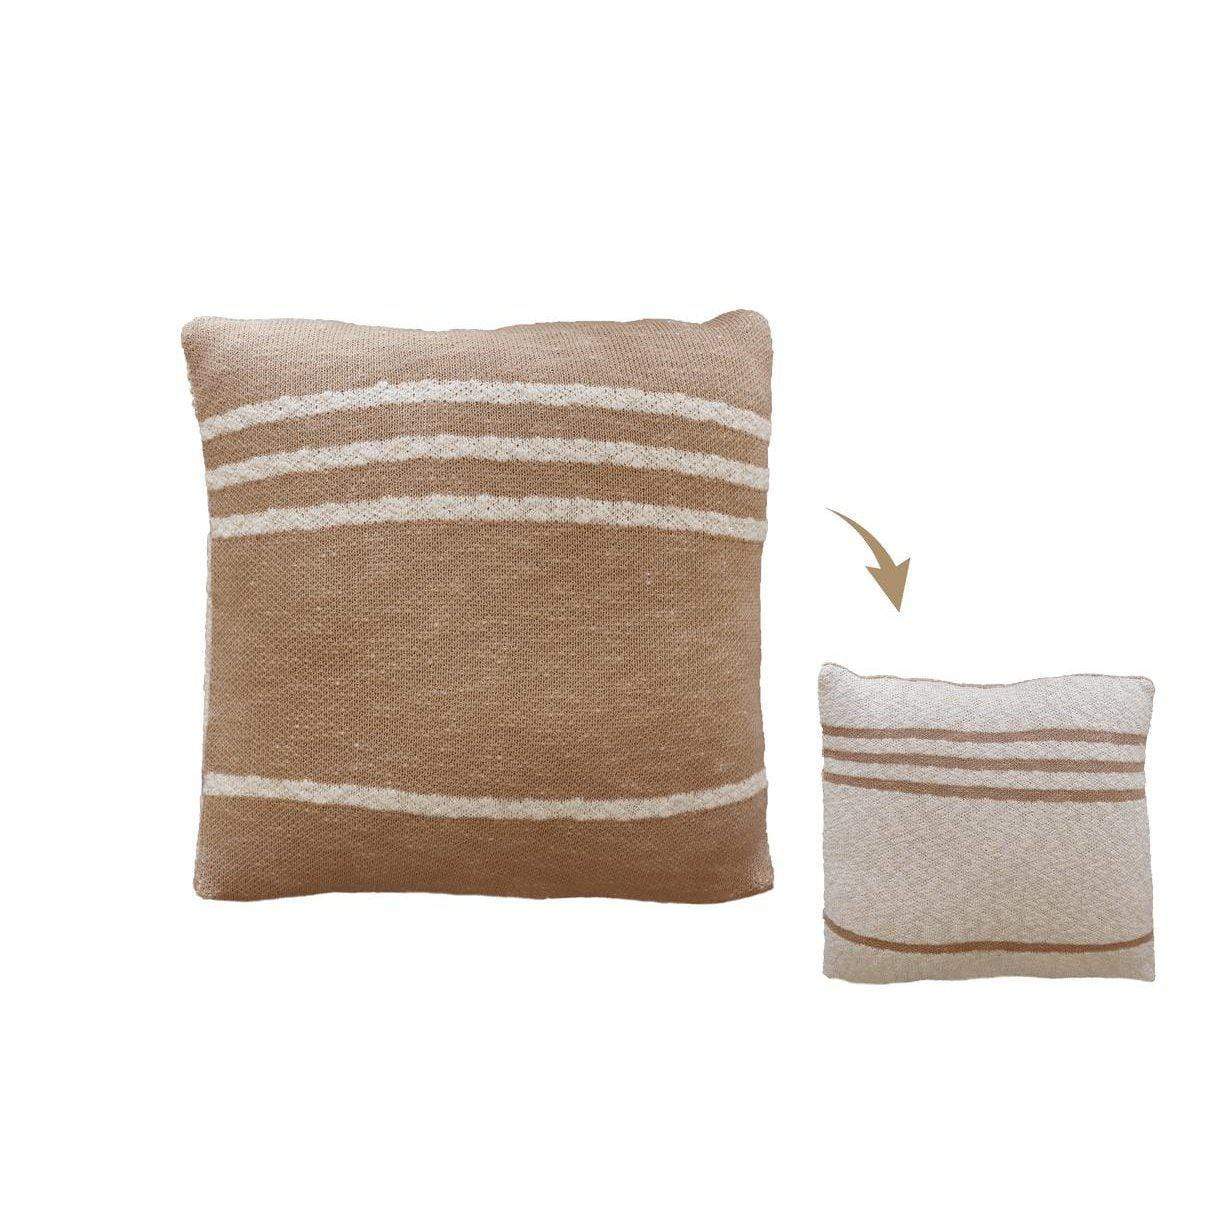 Rugs by Roo | Lorena Canals Duetto Powder Natural Knitted Cushion-SC-DUETTO-POW